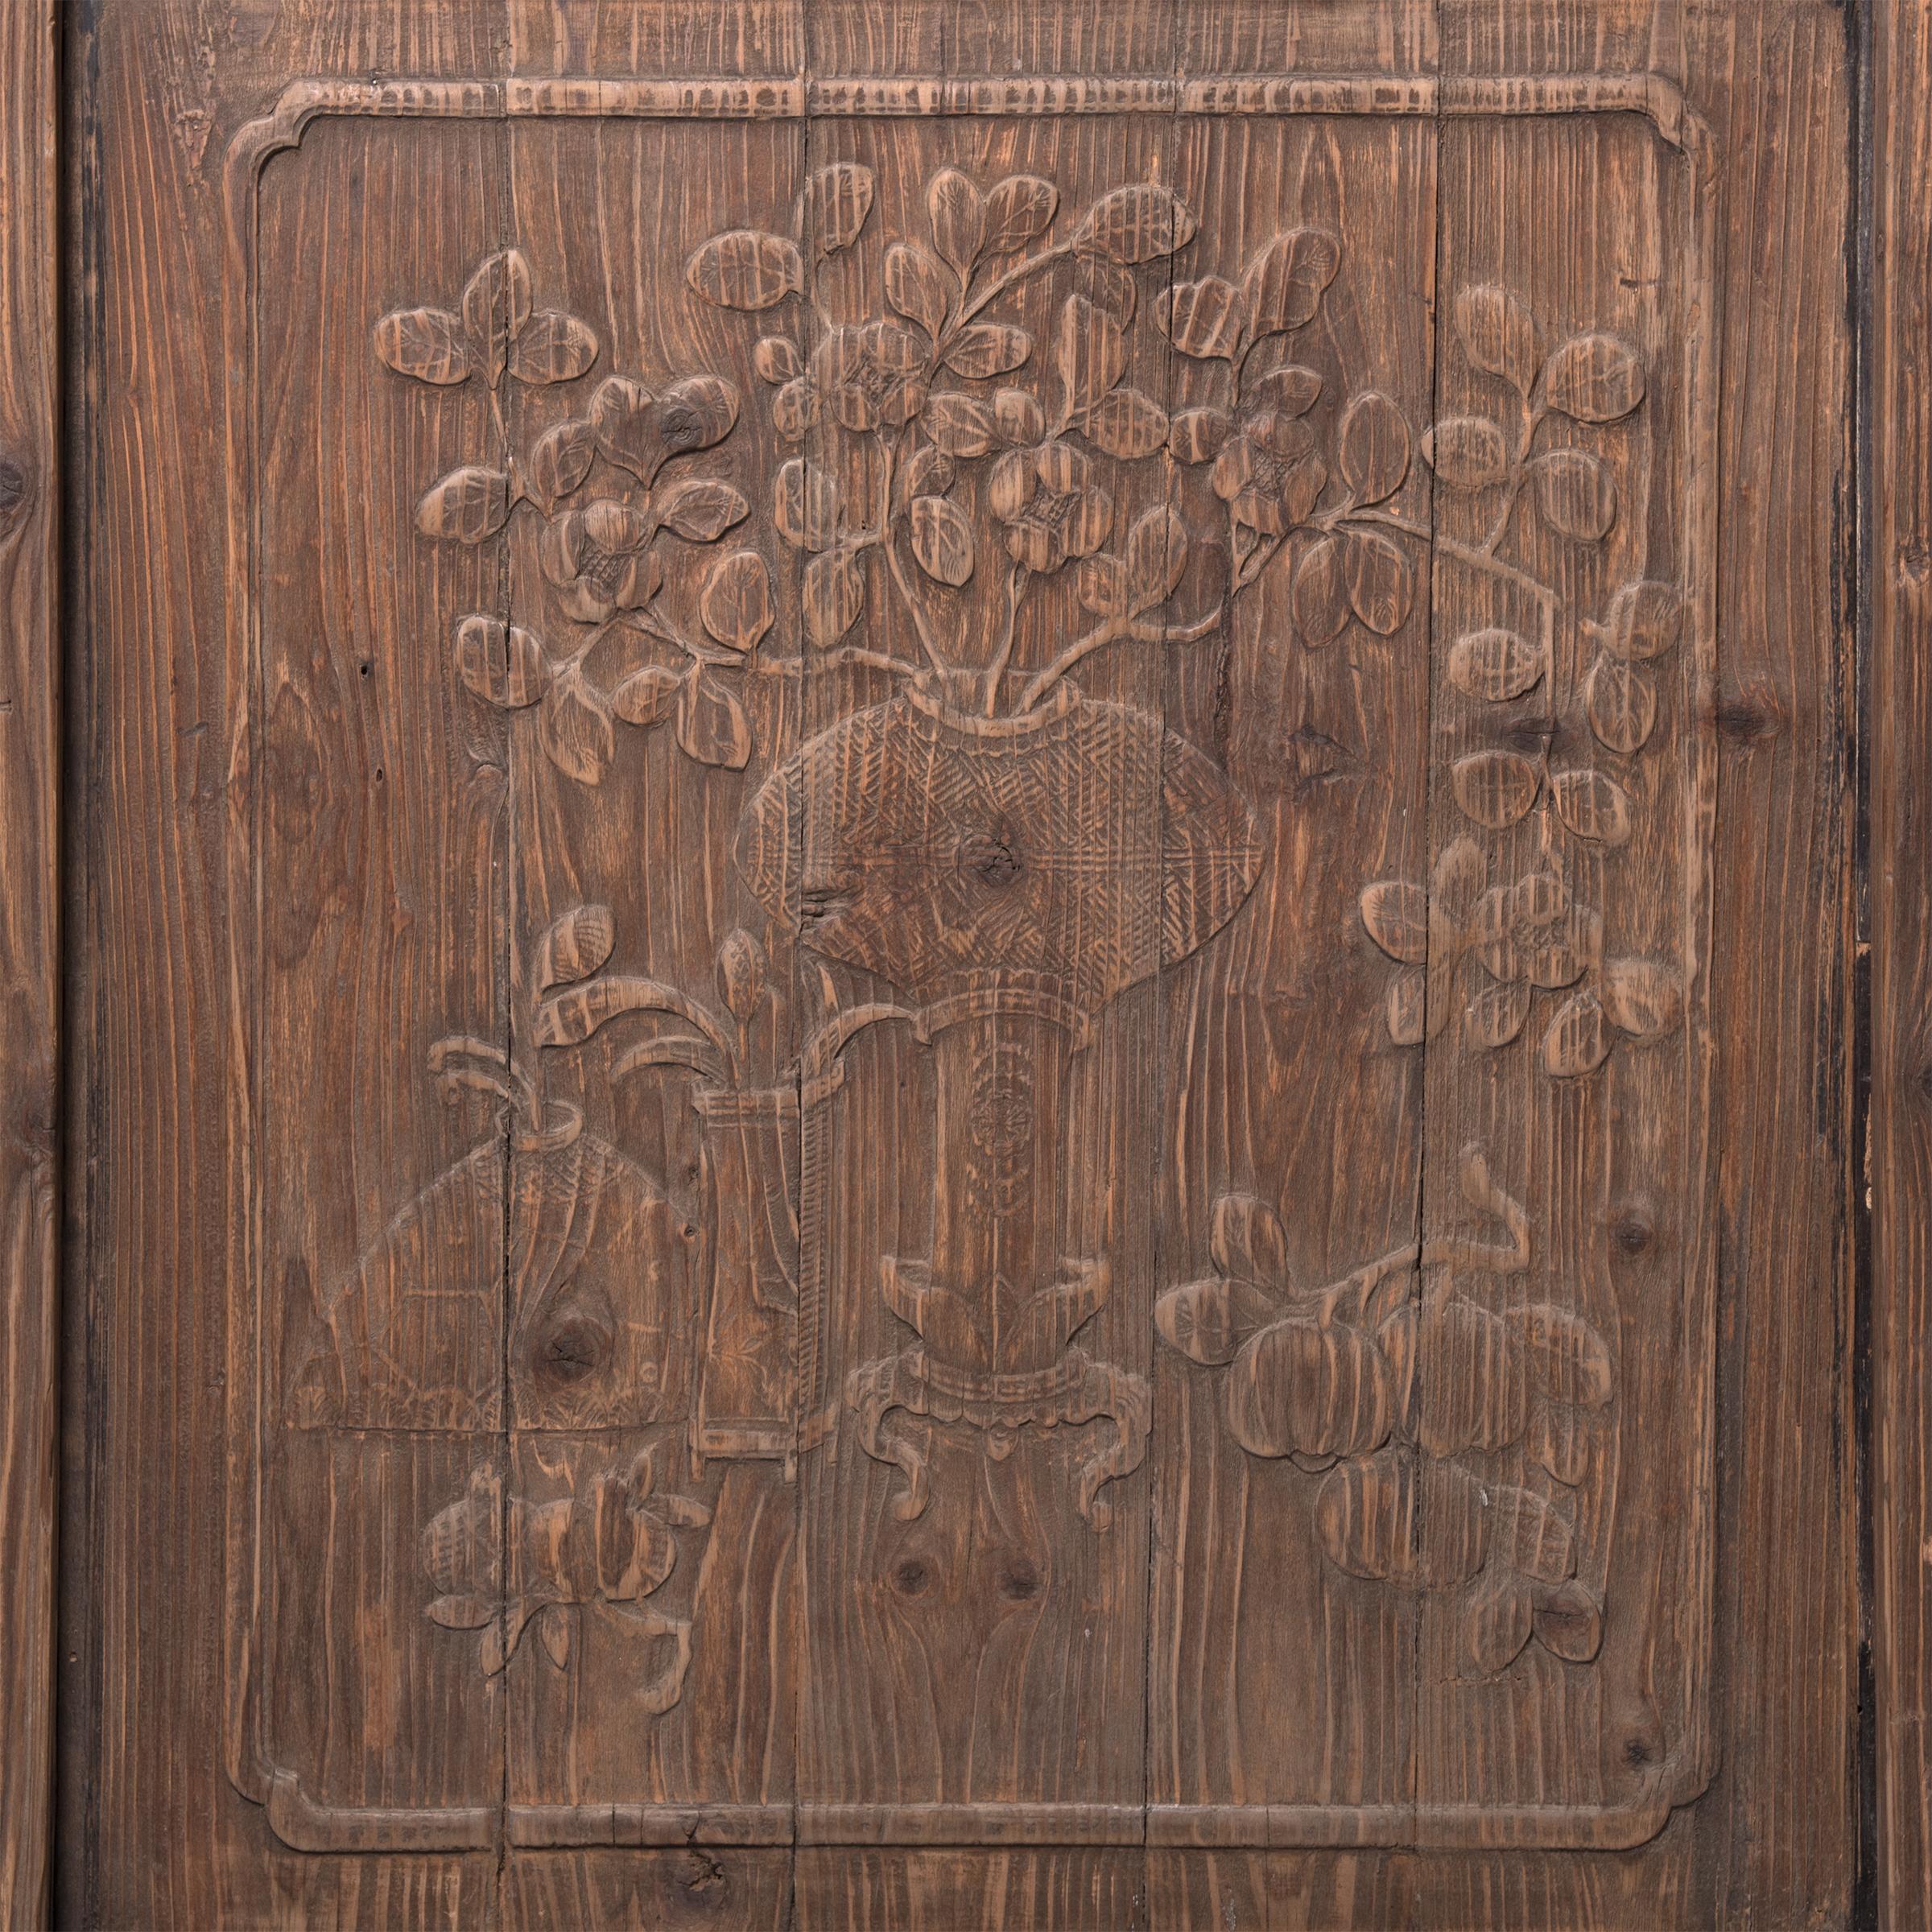 Chinese Carved Architectural Panel with Fruit and Flora, c. 1850 For Sale 1